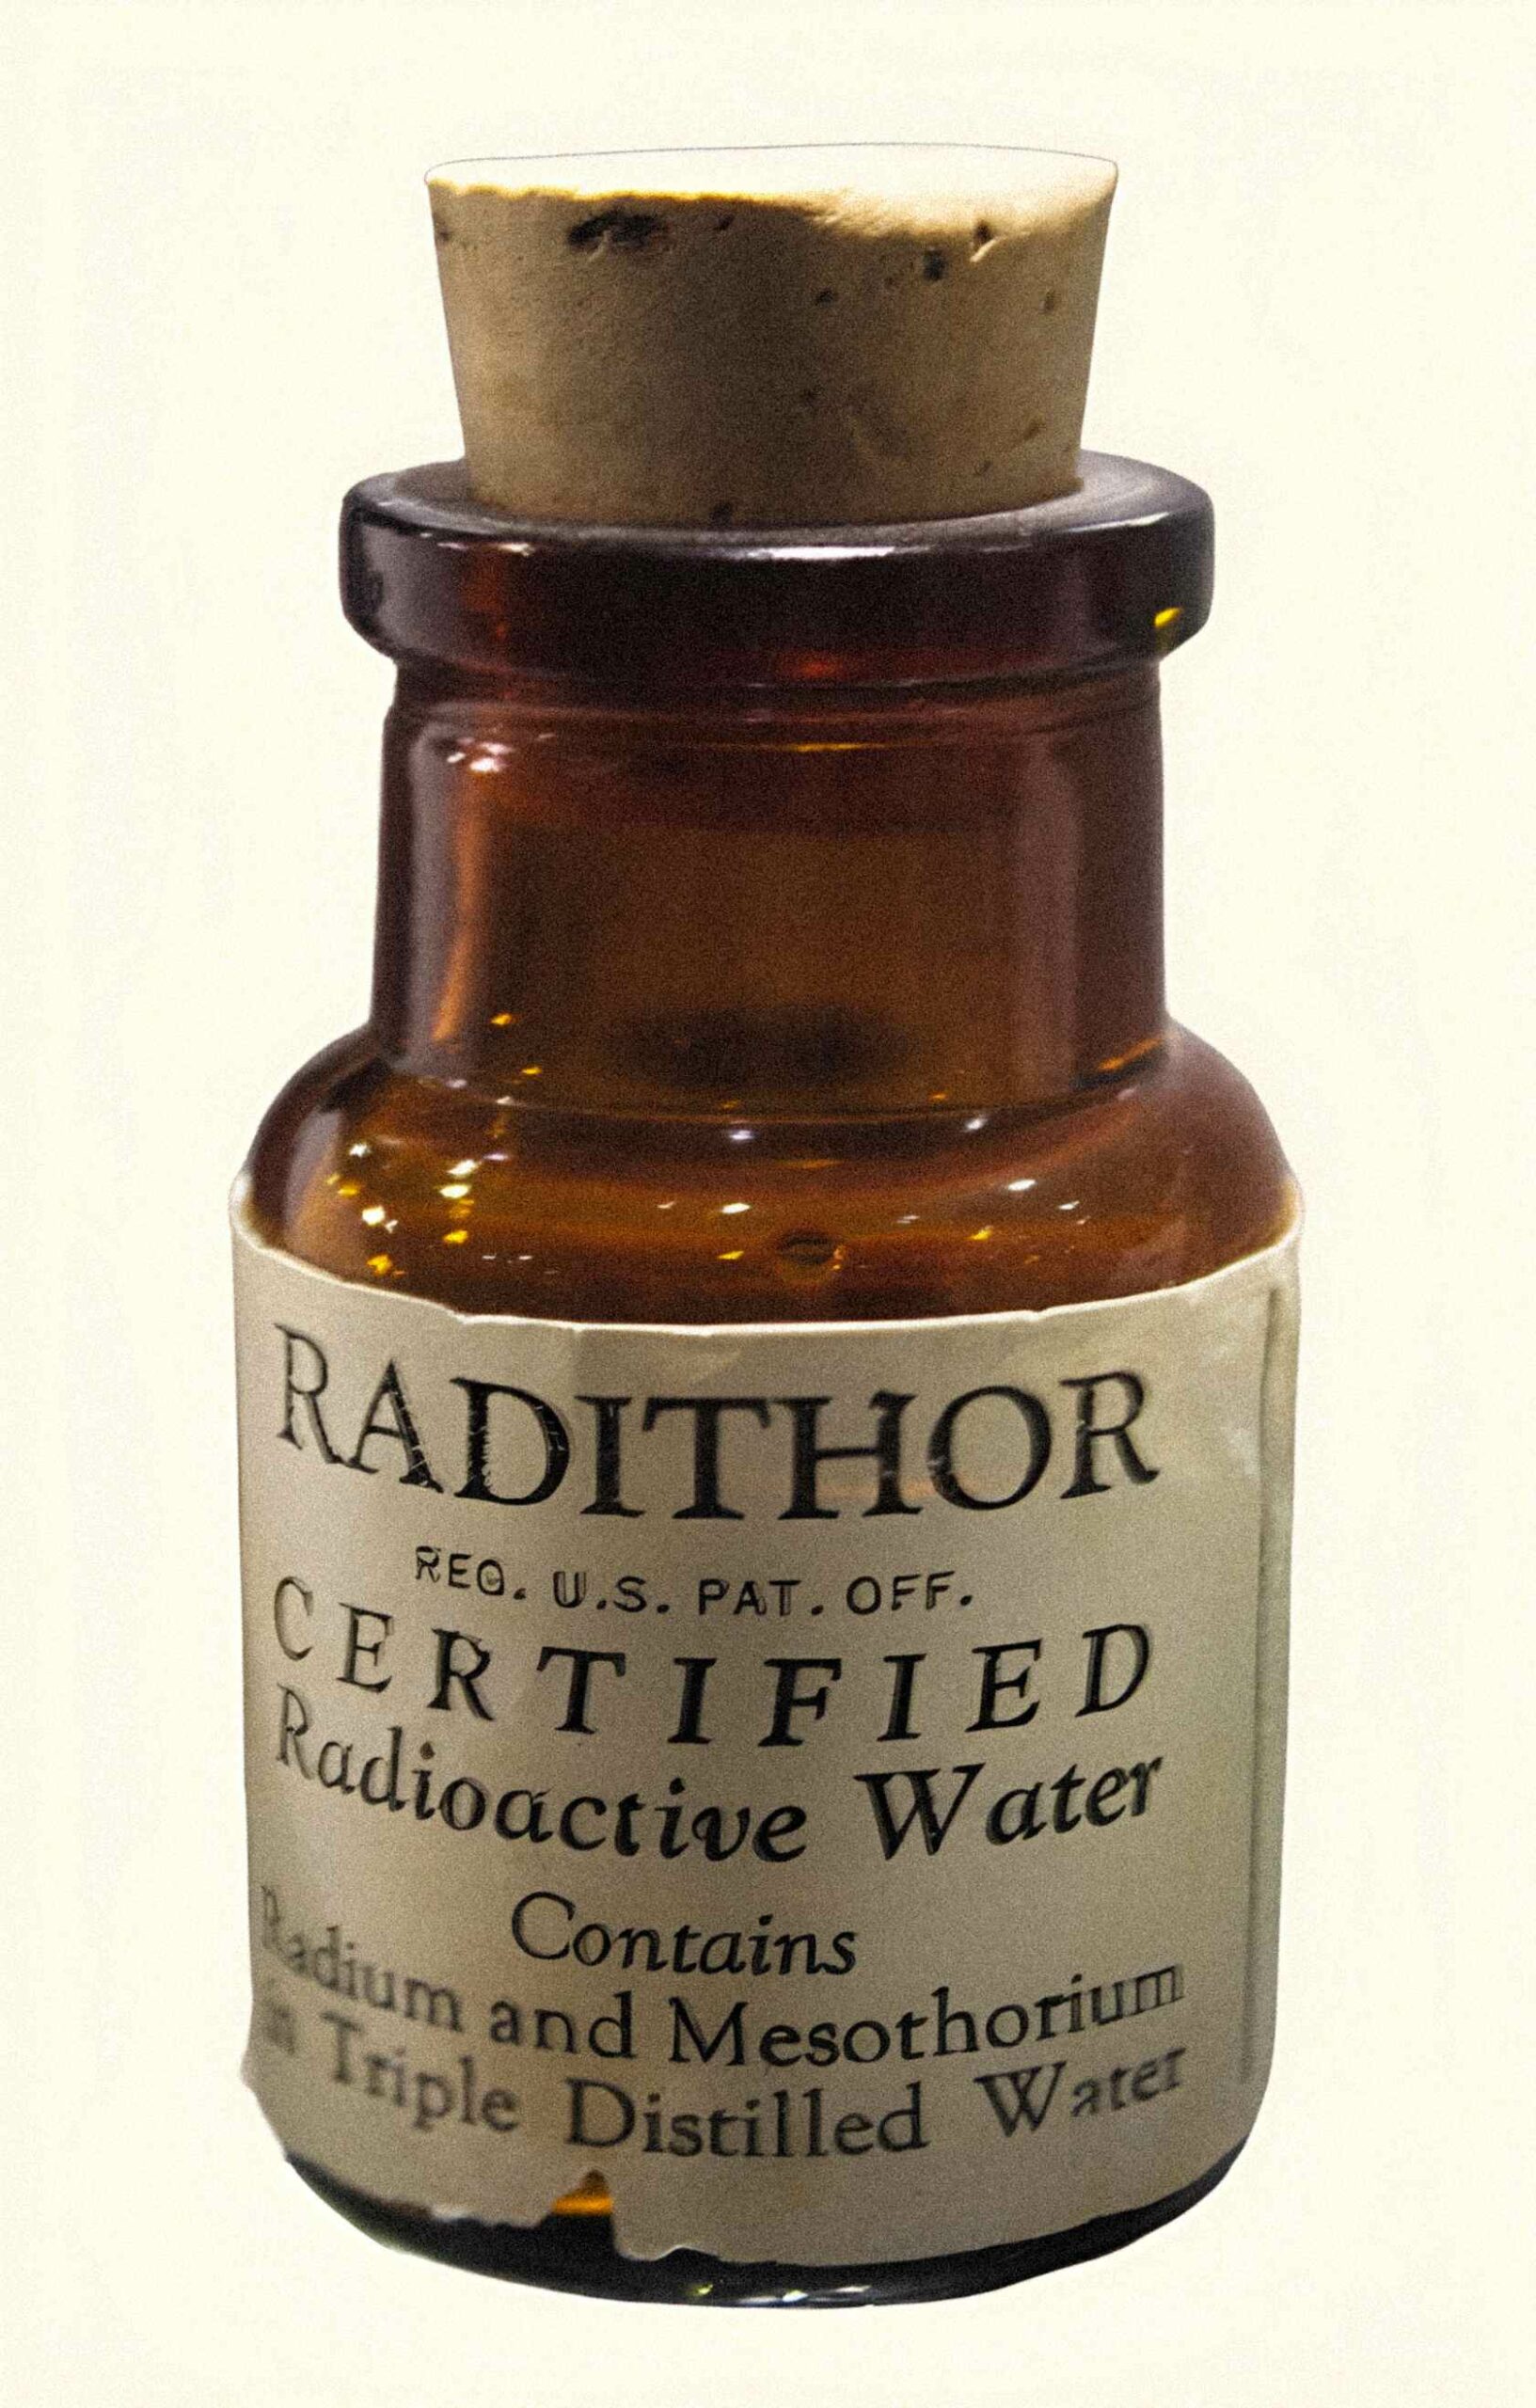 Radithor: The radium water worked fine until his jaw fell off! 2